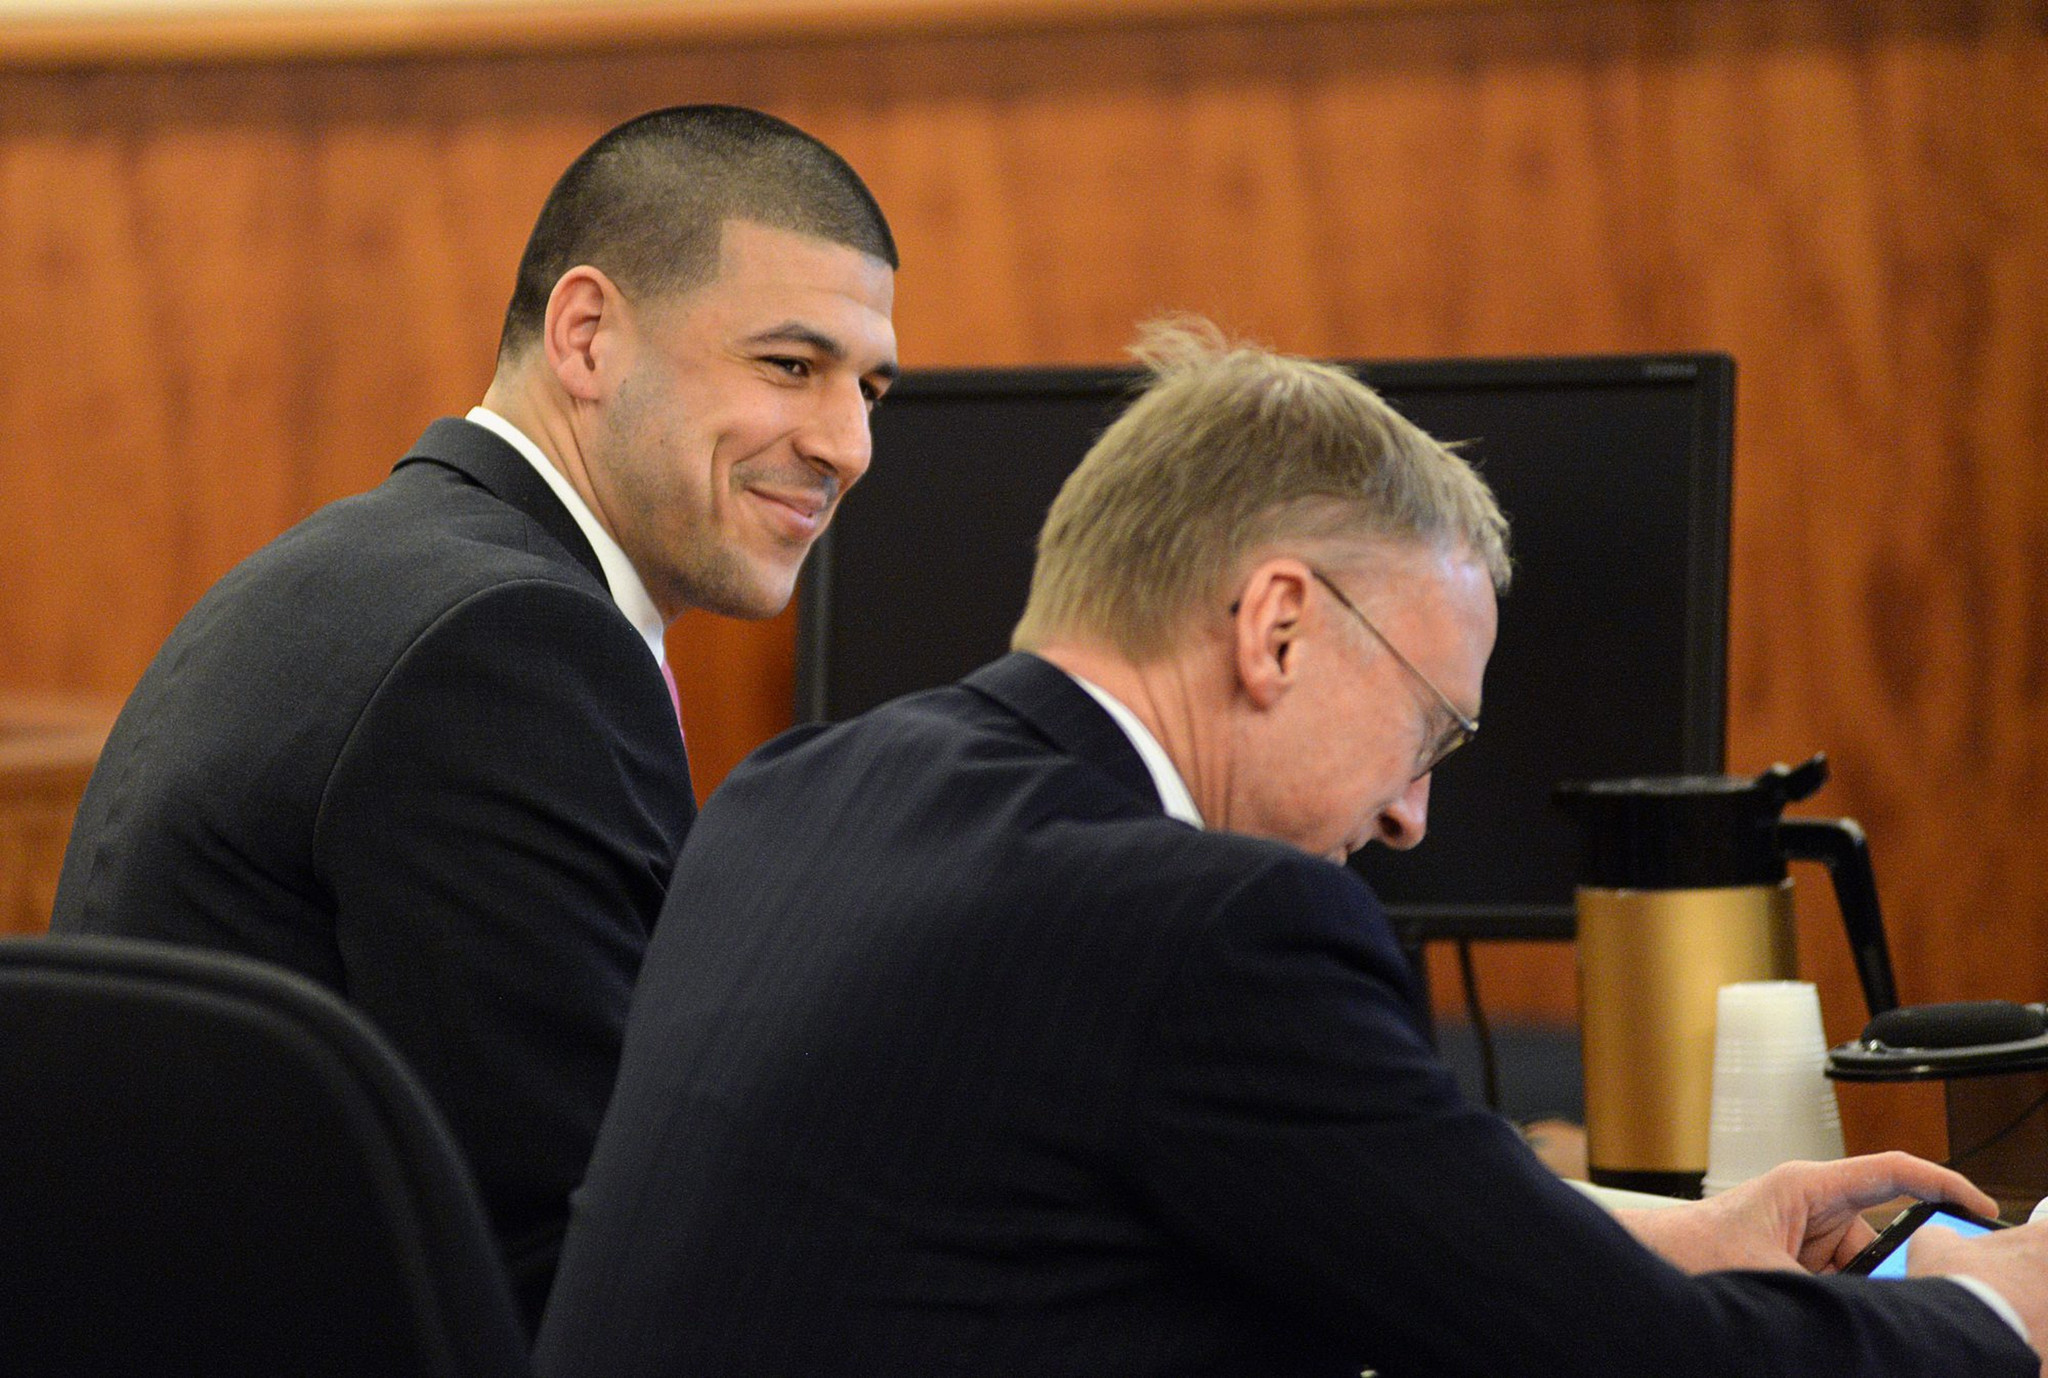 Jury ends 2nd day of deliberations in Aaron Hernandez murder trial